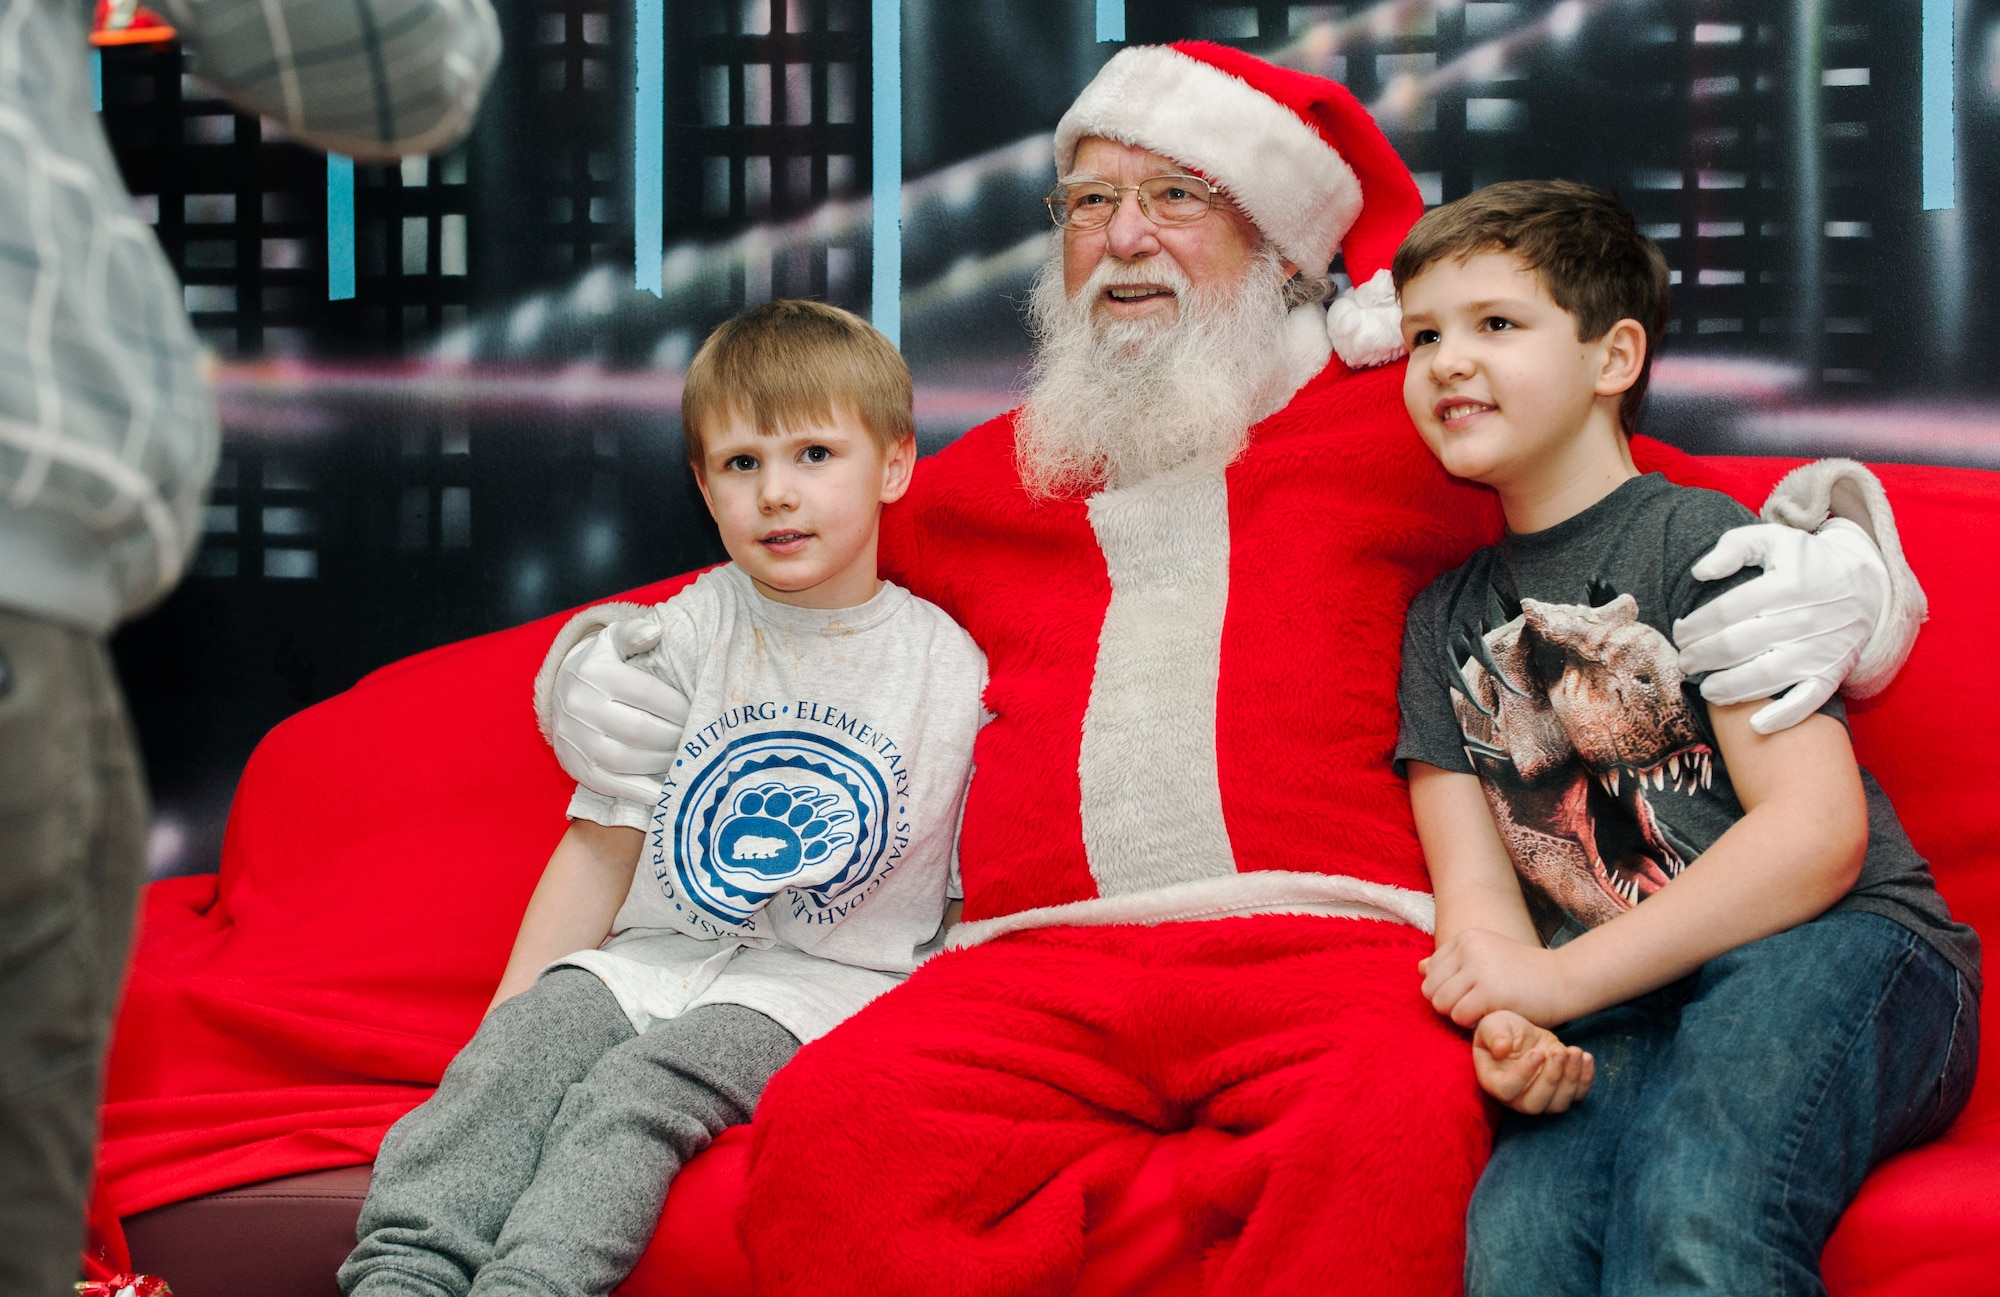 Santa Claus poses for a photo with two Spangdahlem community members during the annual tree-lighting ceremony at the Bowling Alley at Spangdahlem Air Base, Germany, Dec. 10, 2015. Spangdahlem community members and their children met Santa Claus, asked for presents and took photos. (U.S. Air Force photo by Airman 1st Class Timothy Kim/Released)